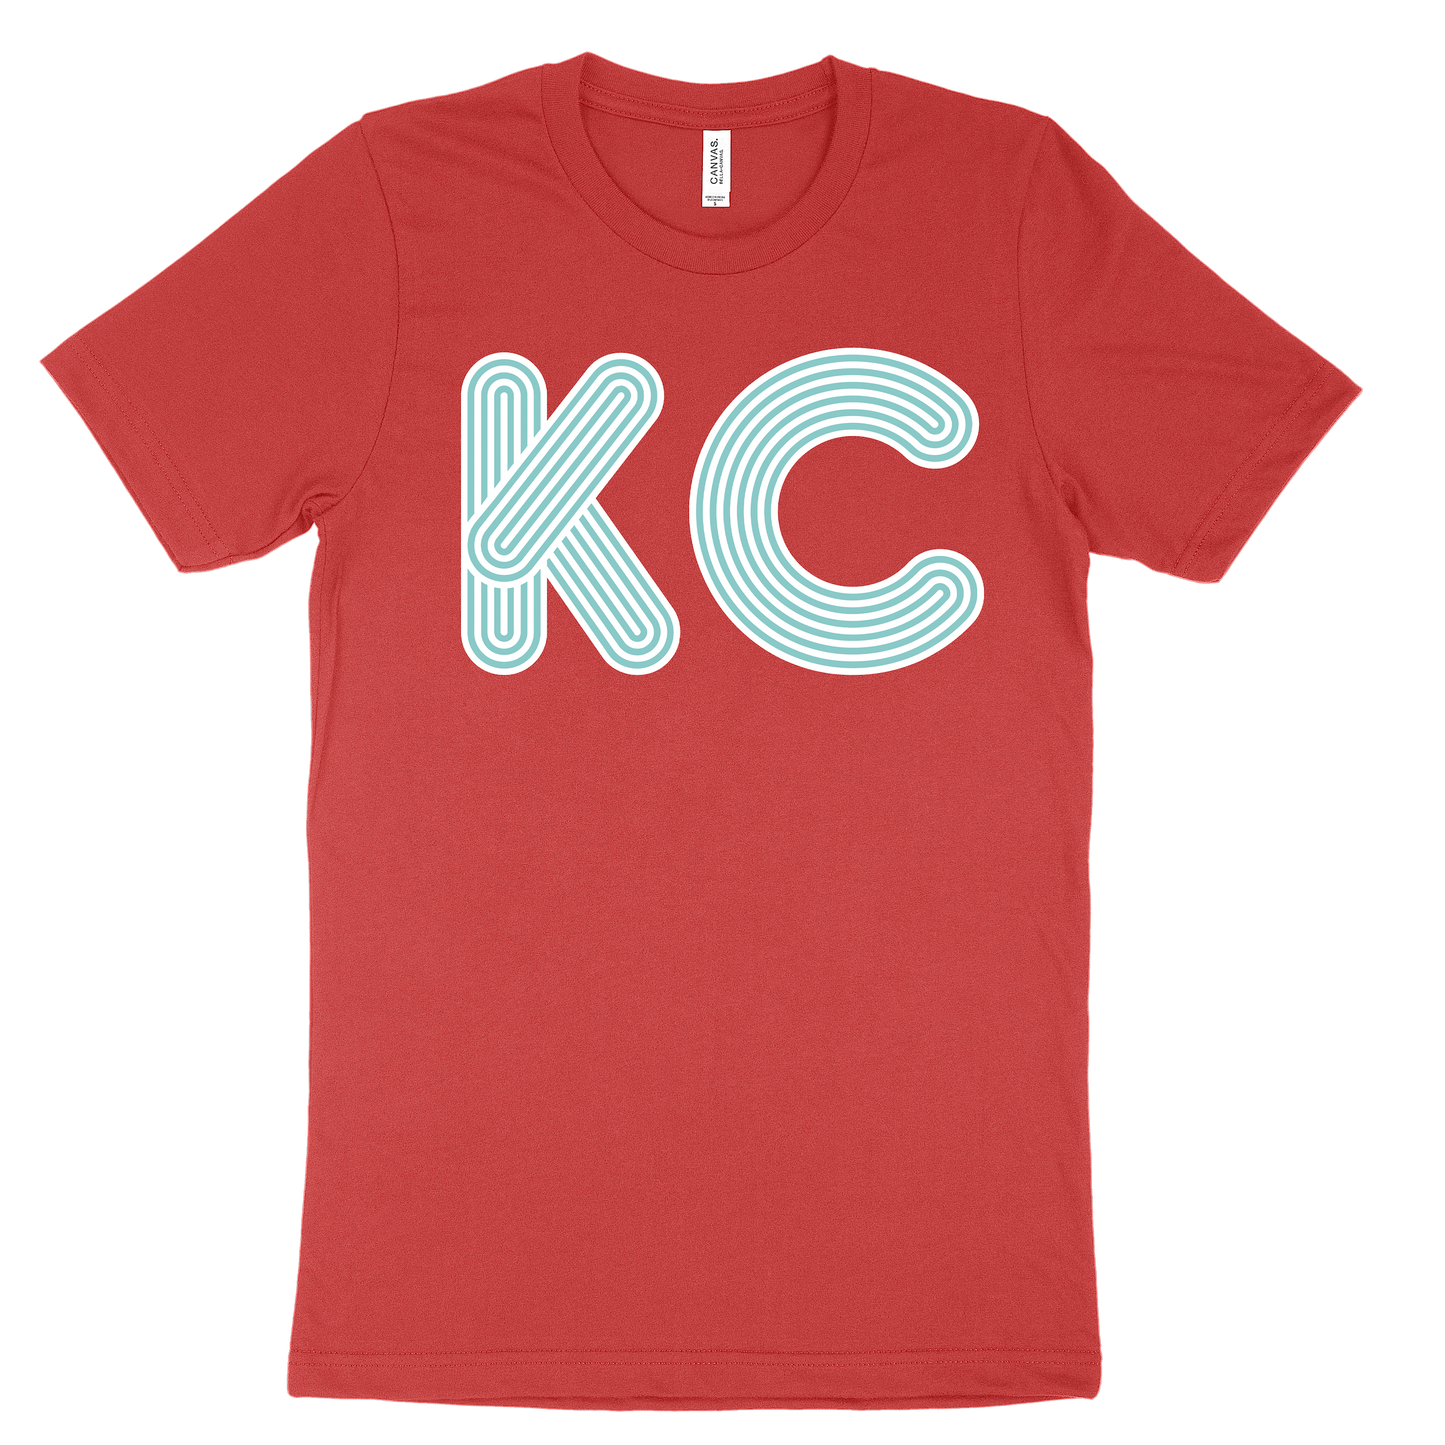 KC Outline Tee - Red Teal